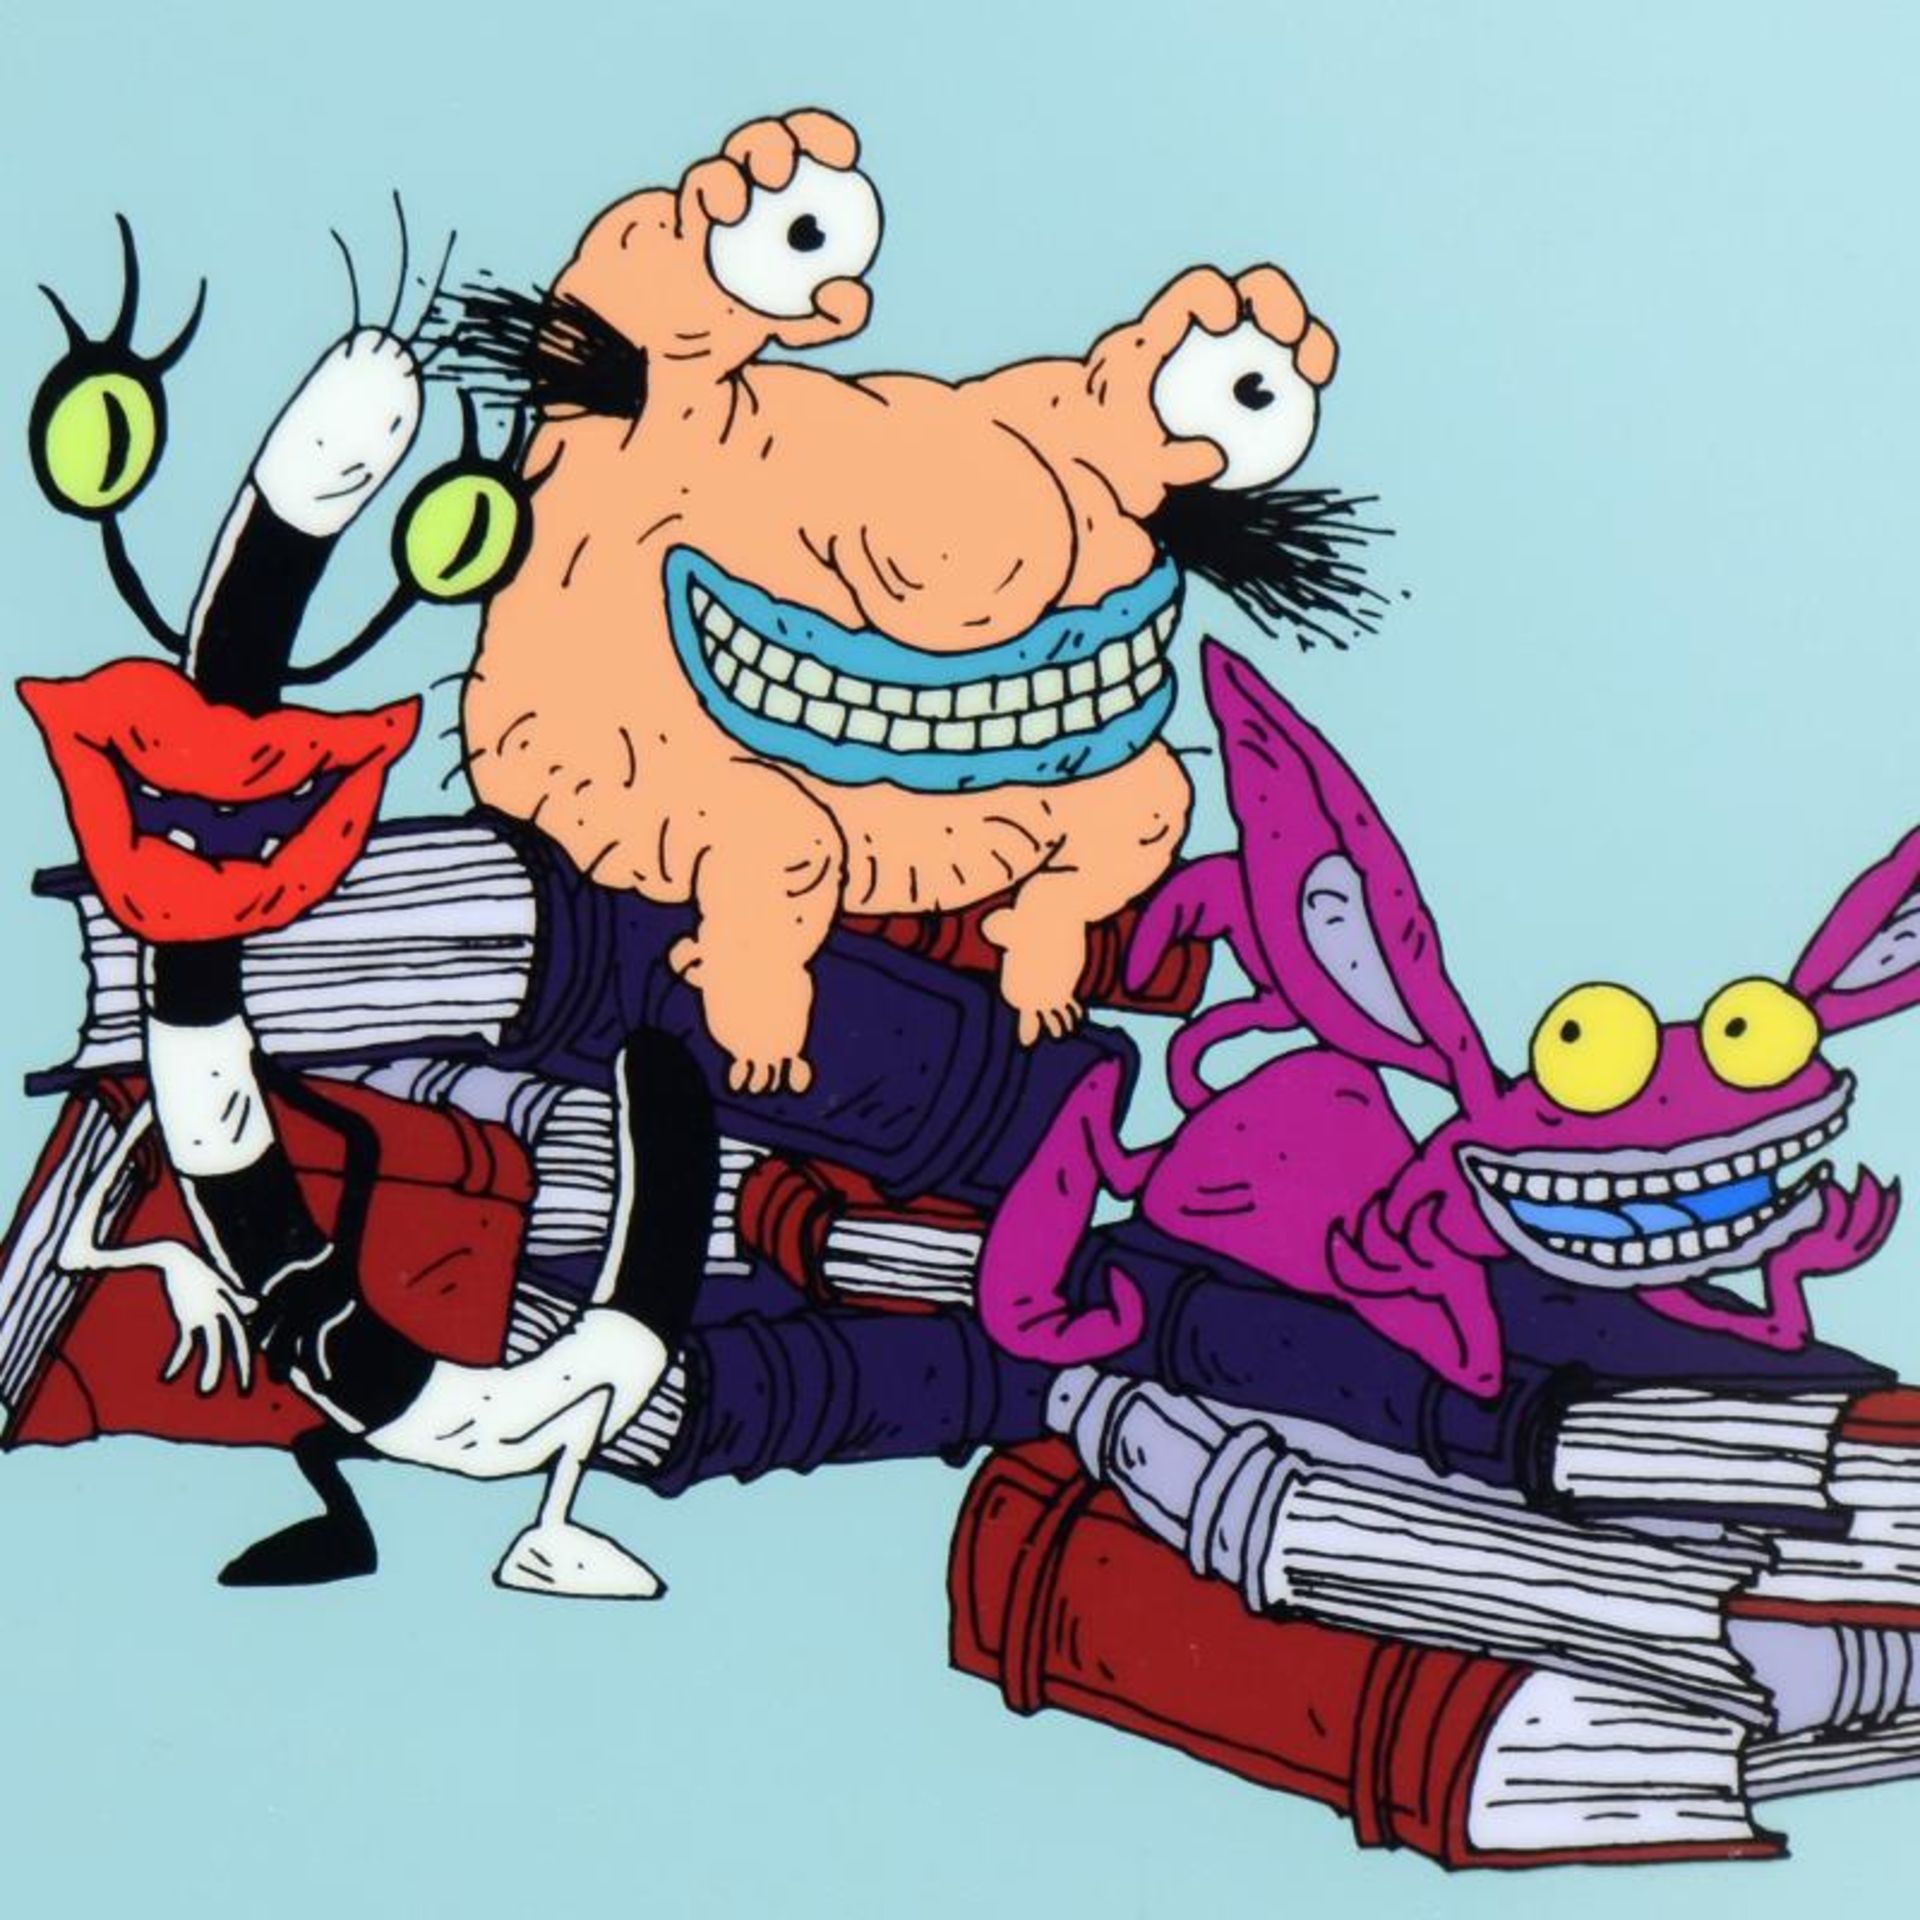 Aaahh!!! Real Monsters by Aaahh, Real Monsters - Image 2 of 2